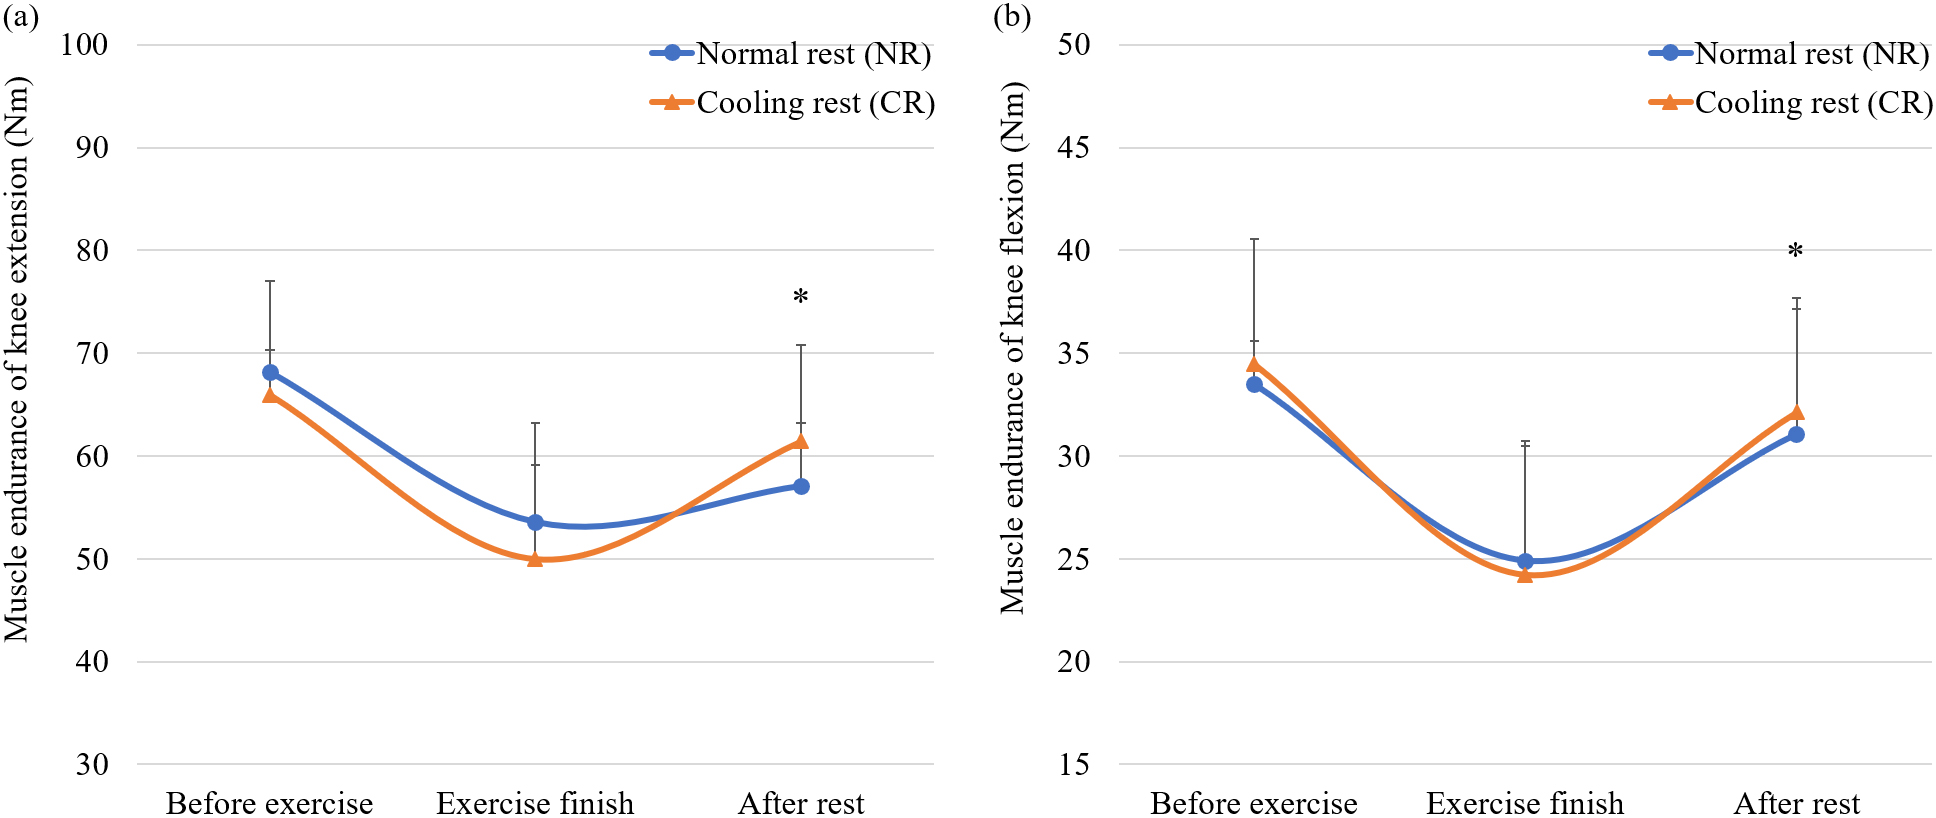 Muscle endurance (mean ± SD) for (a) knee extension and (b) knee flexion with the normal rest and cooling rest.